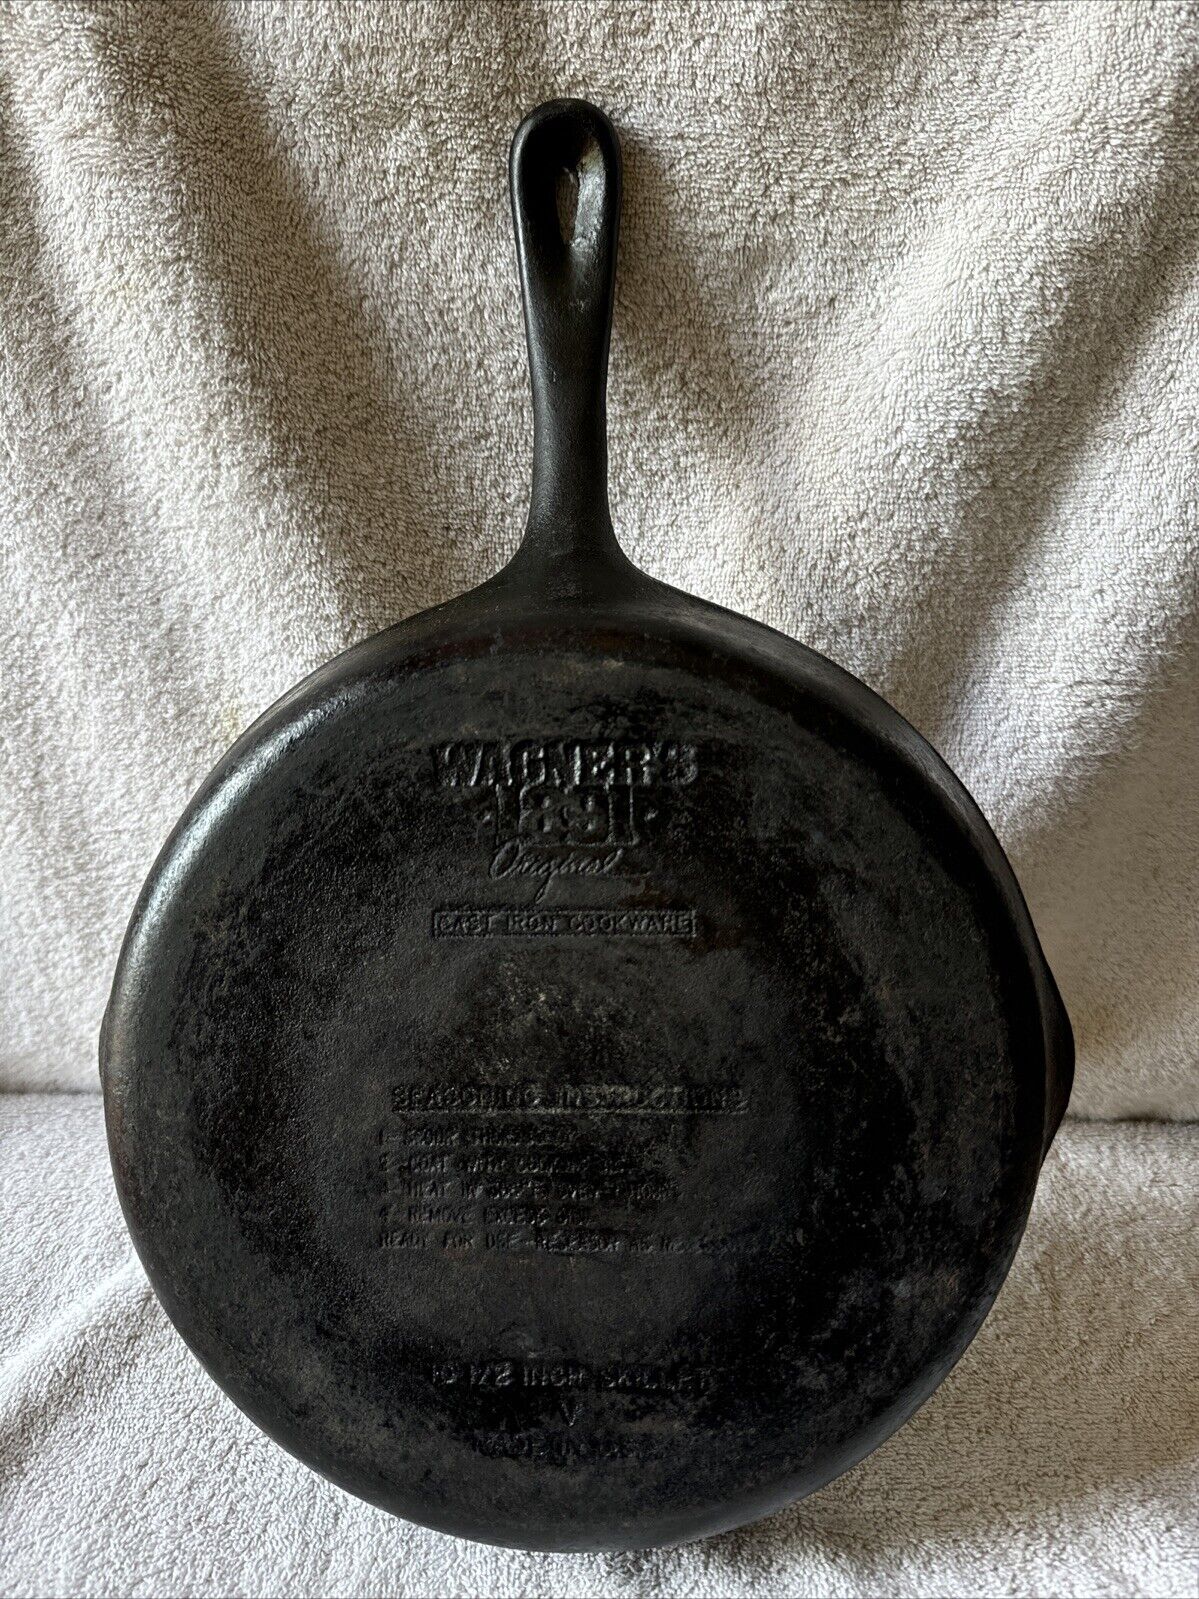 Wagners 1891 Cast Iron Skillet Fry Pan Cookware 10 1/2